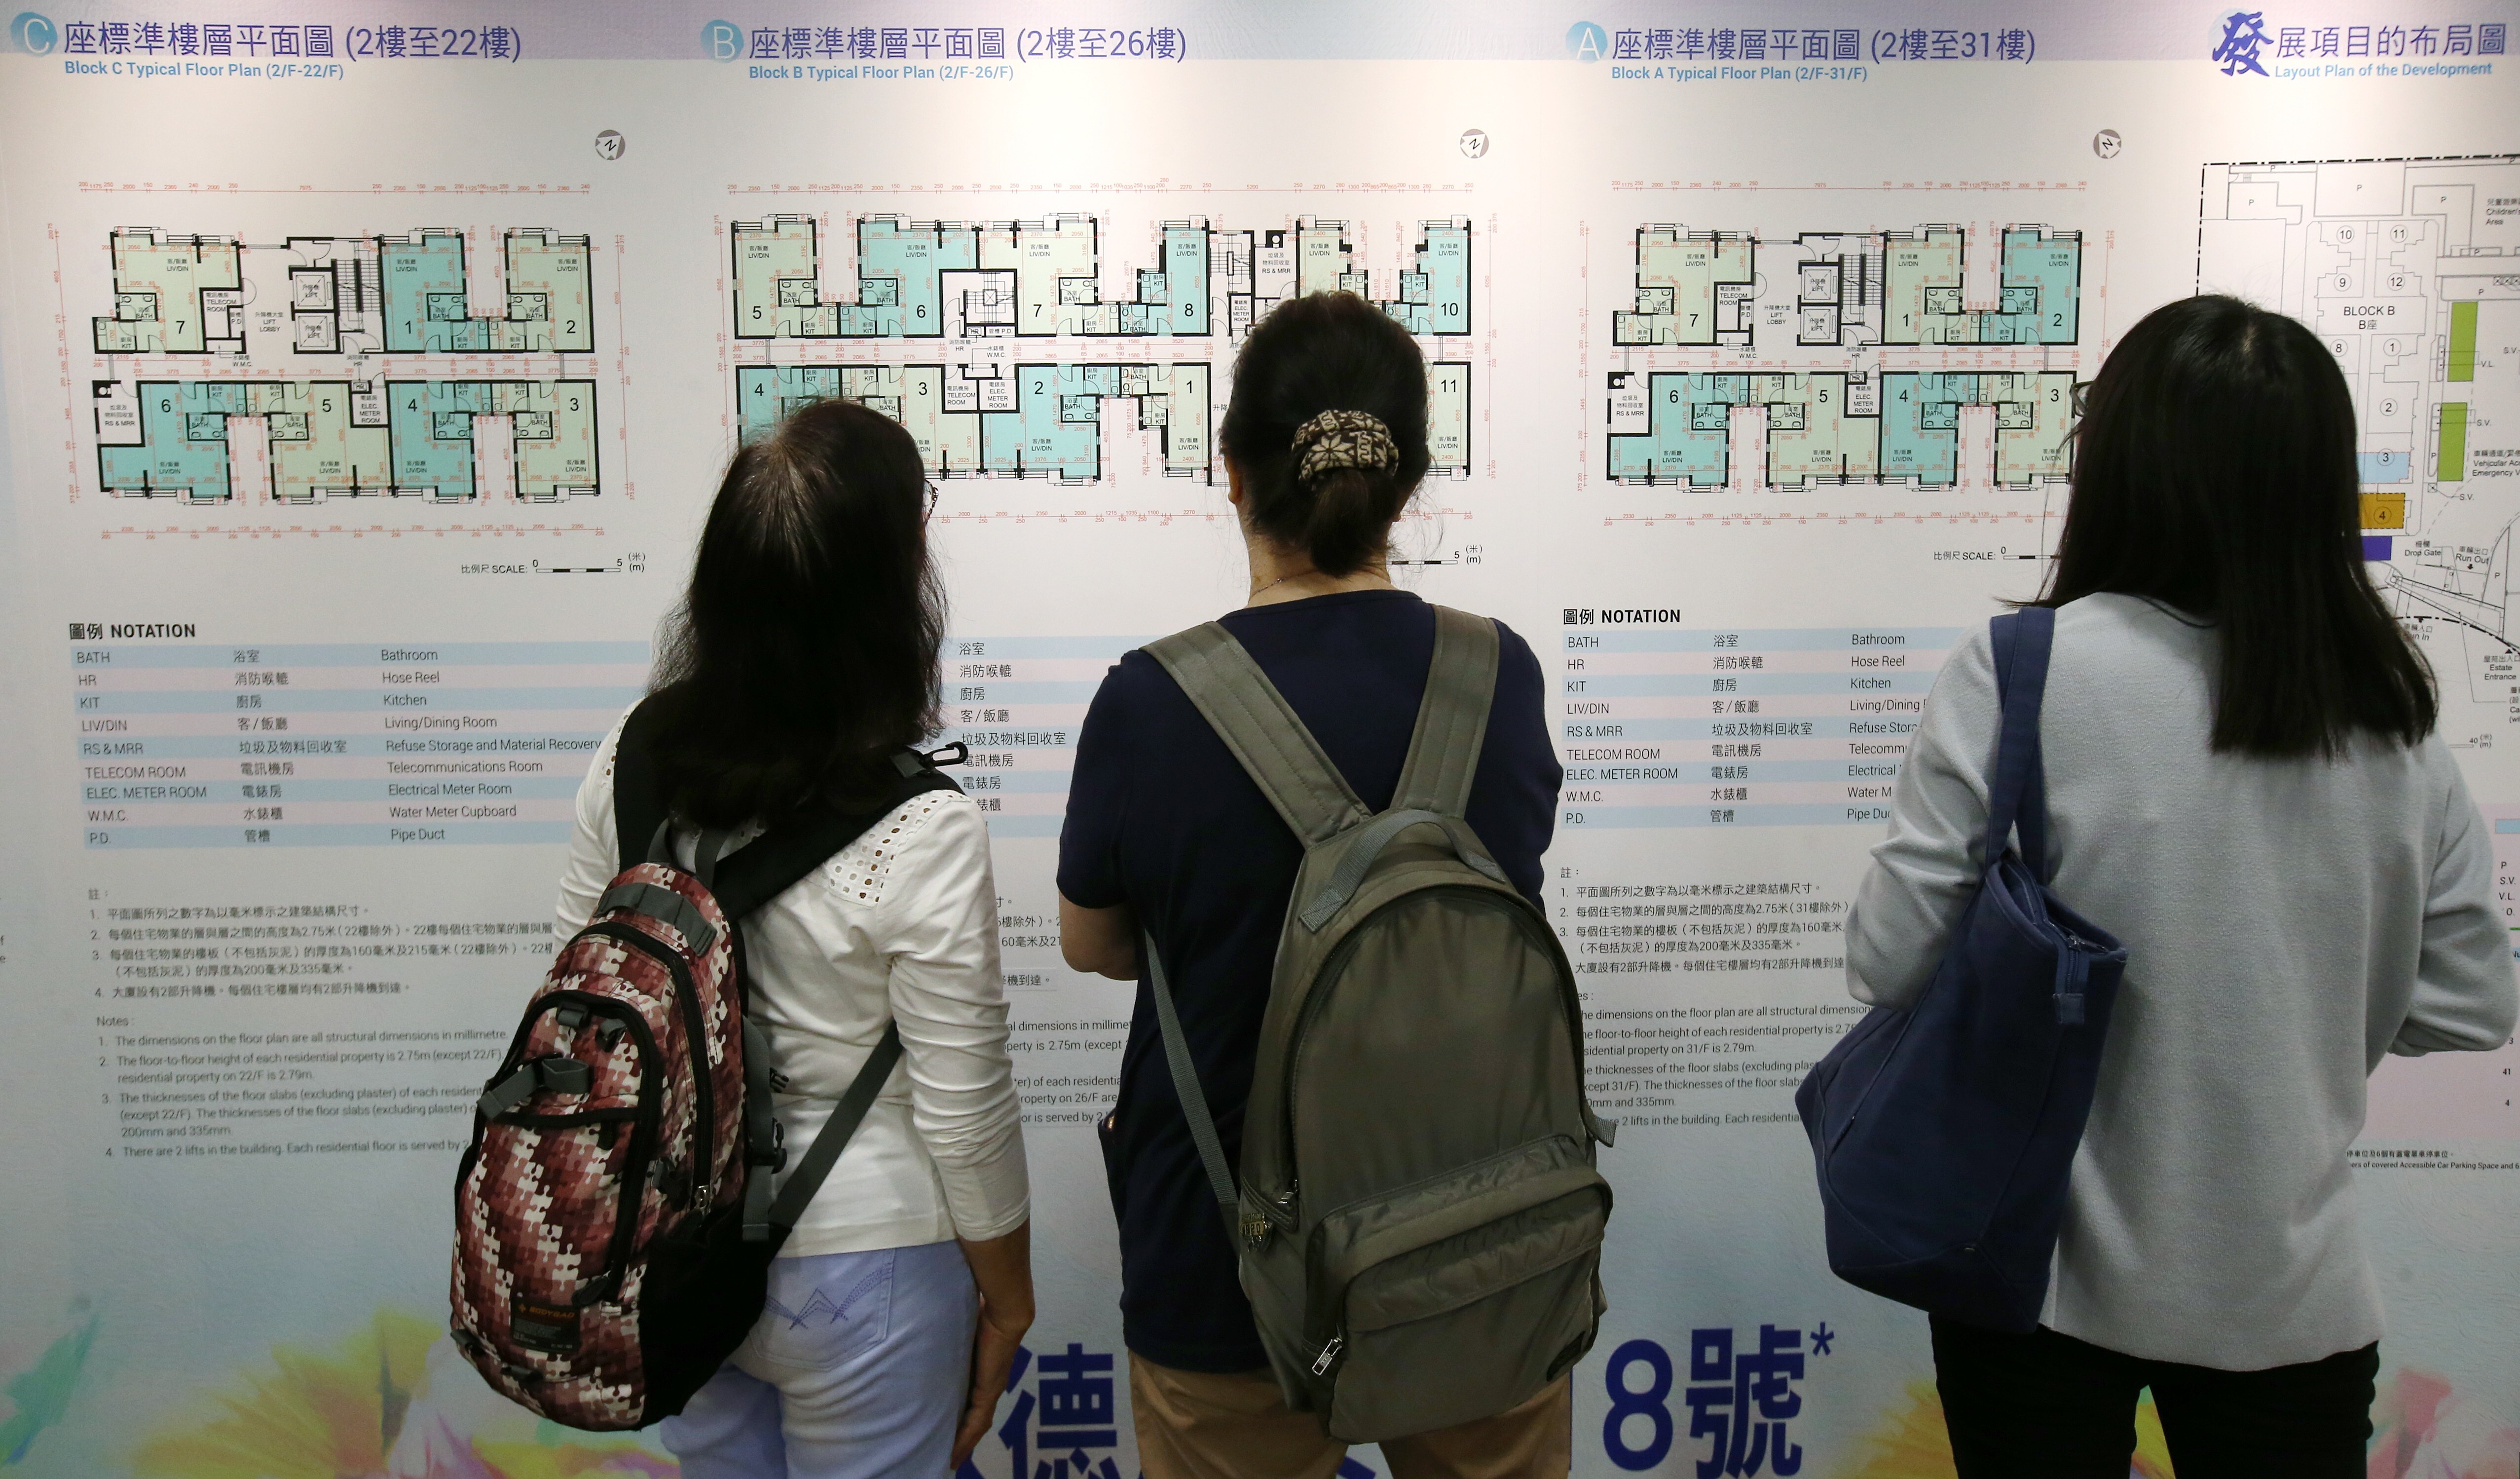 People looking at the layout plan for a residential project in Kai Tak, Hong Kong. Photo: David Wong